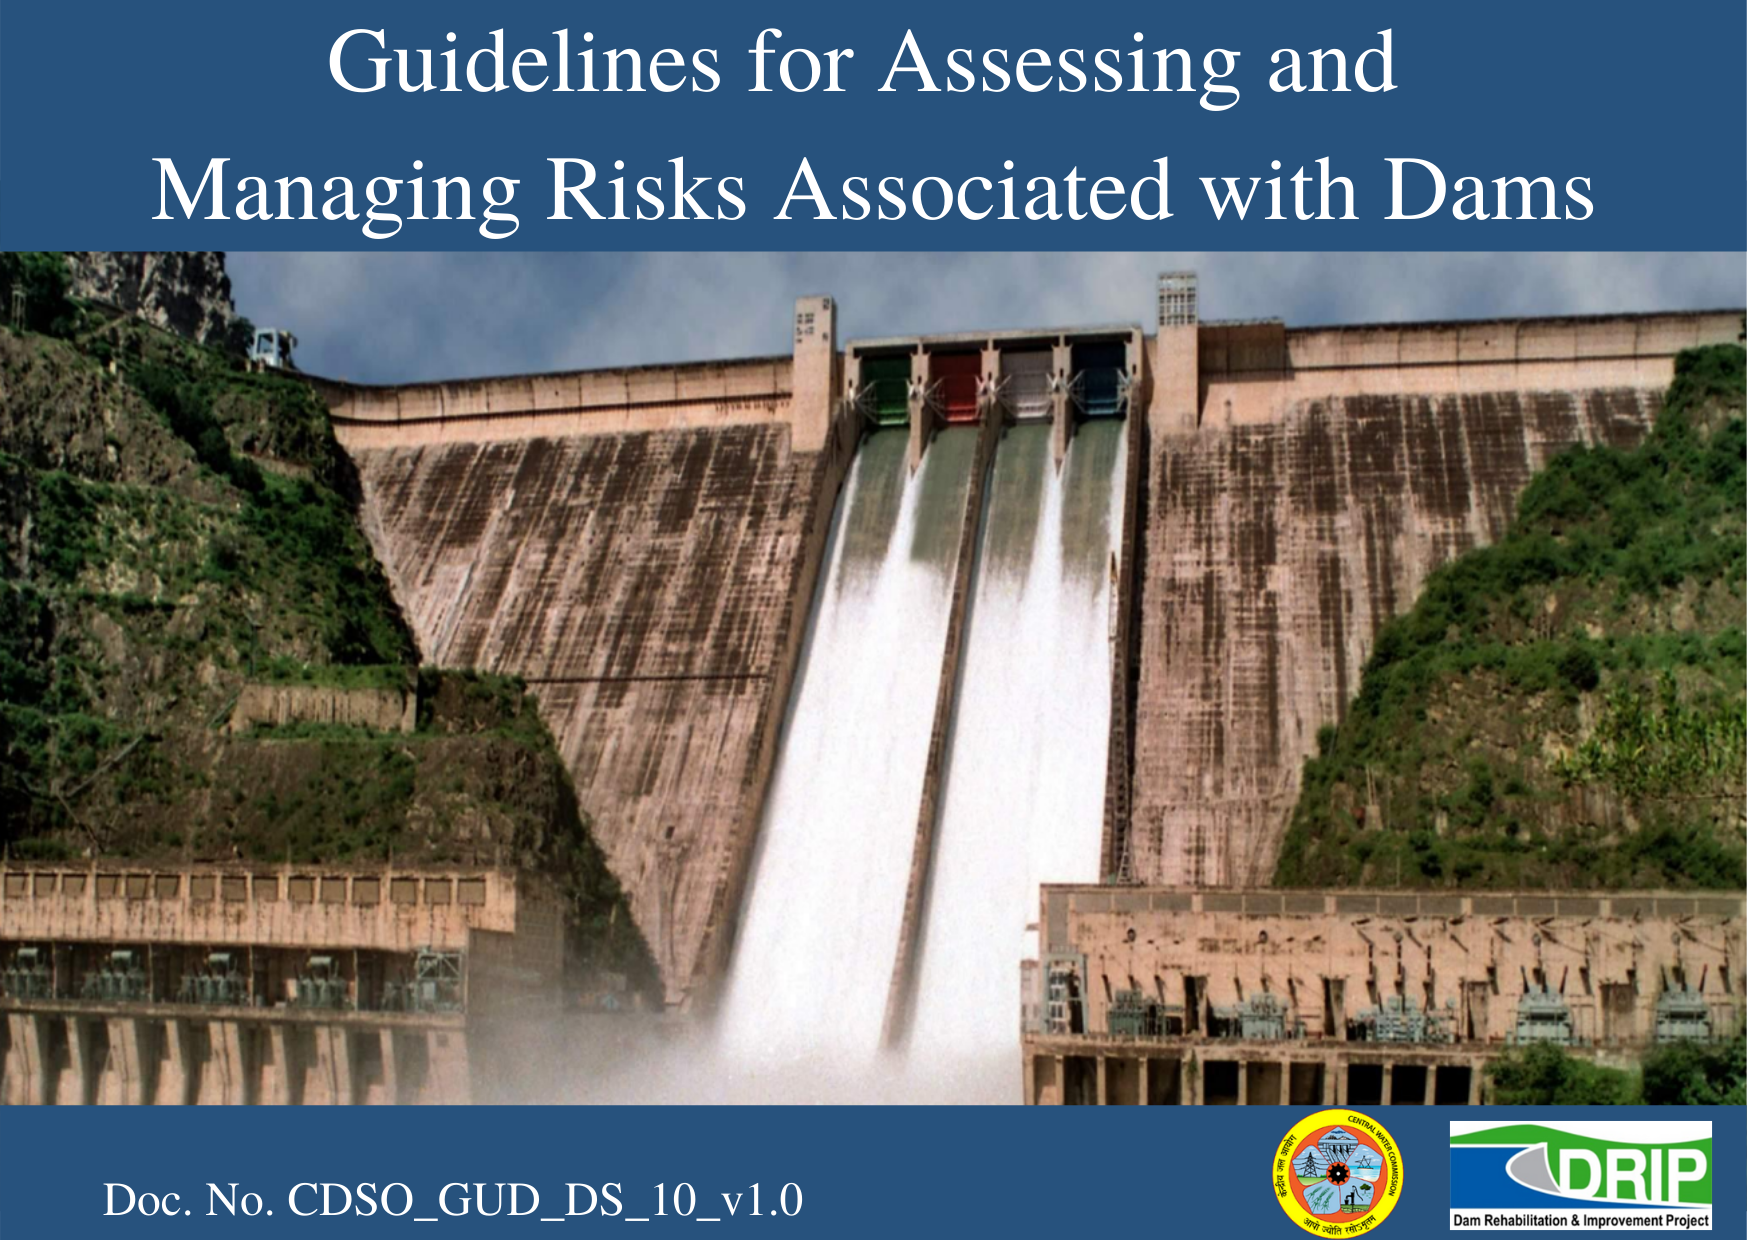 Guidelines-for-Assessing-and-Managing-Risks-Associated-with-Dams-Central-Water-Comission-CWC-DRIP-DAM-REHABILITATION-AND-IMPROVEMENT-PROJECT-IPRESAS